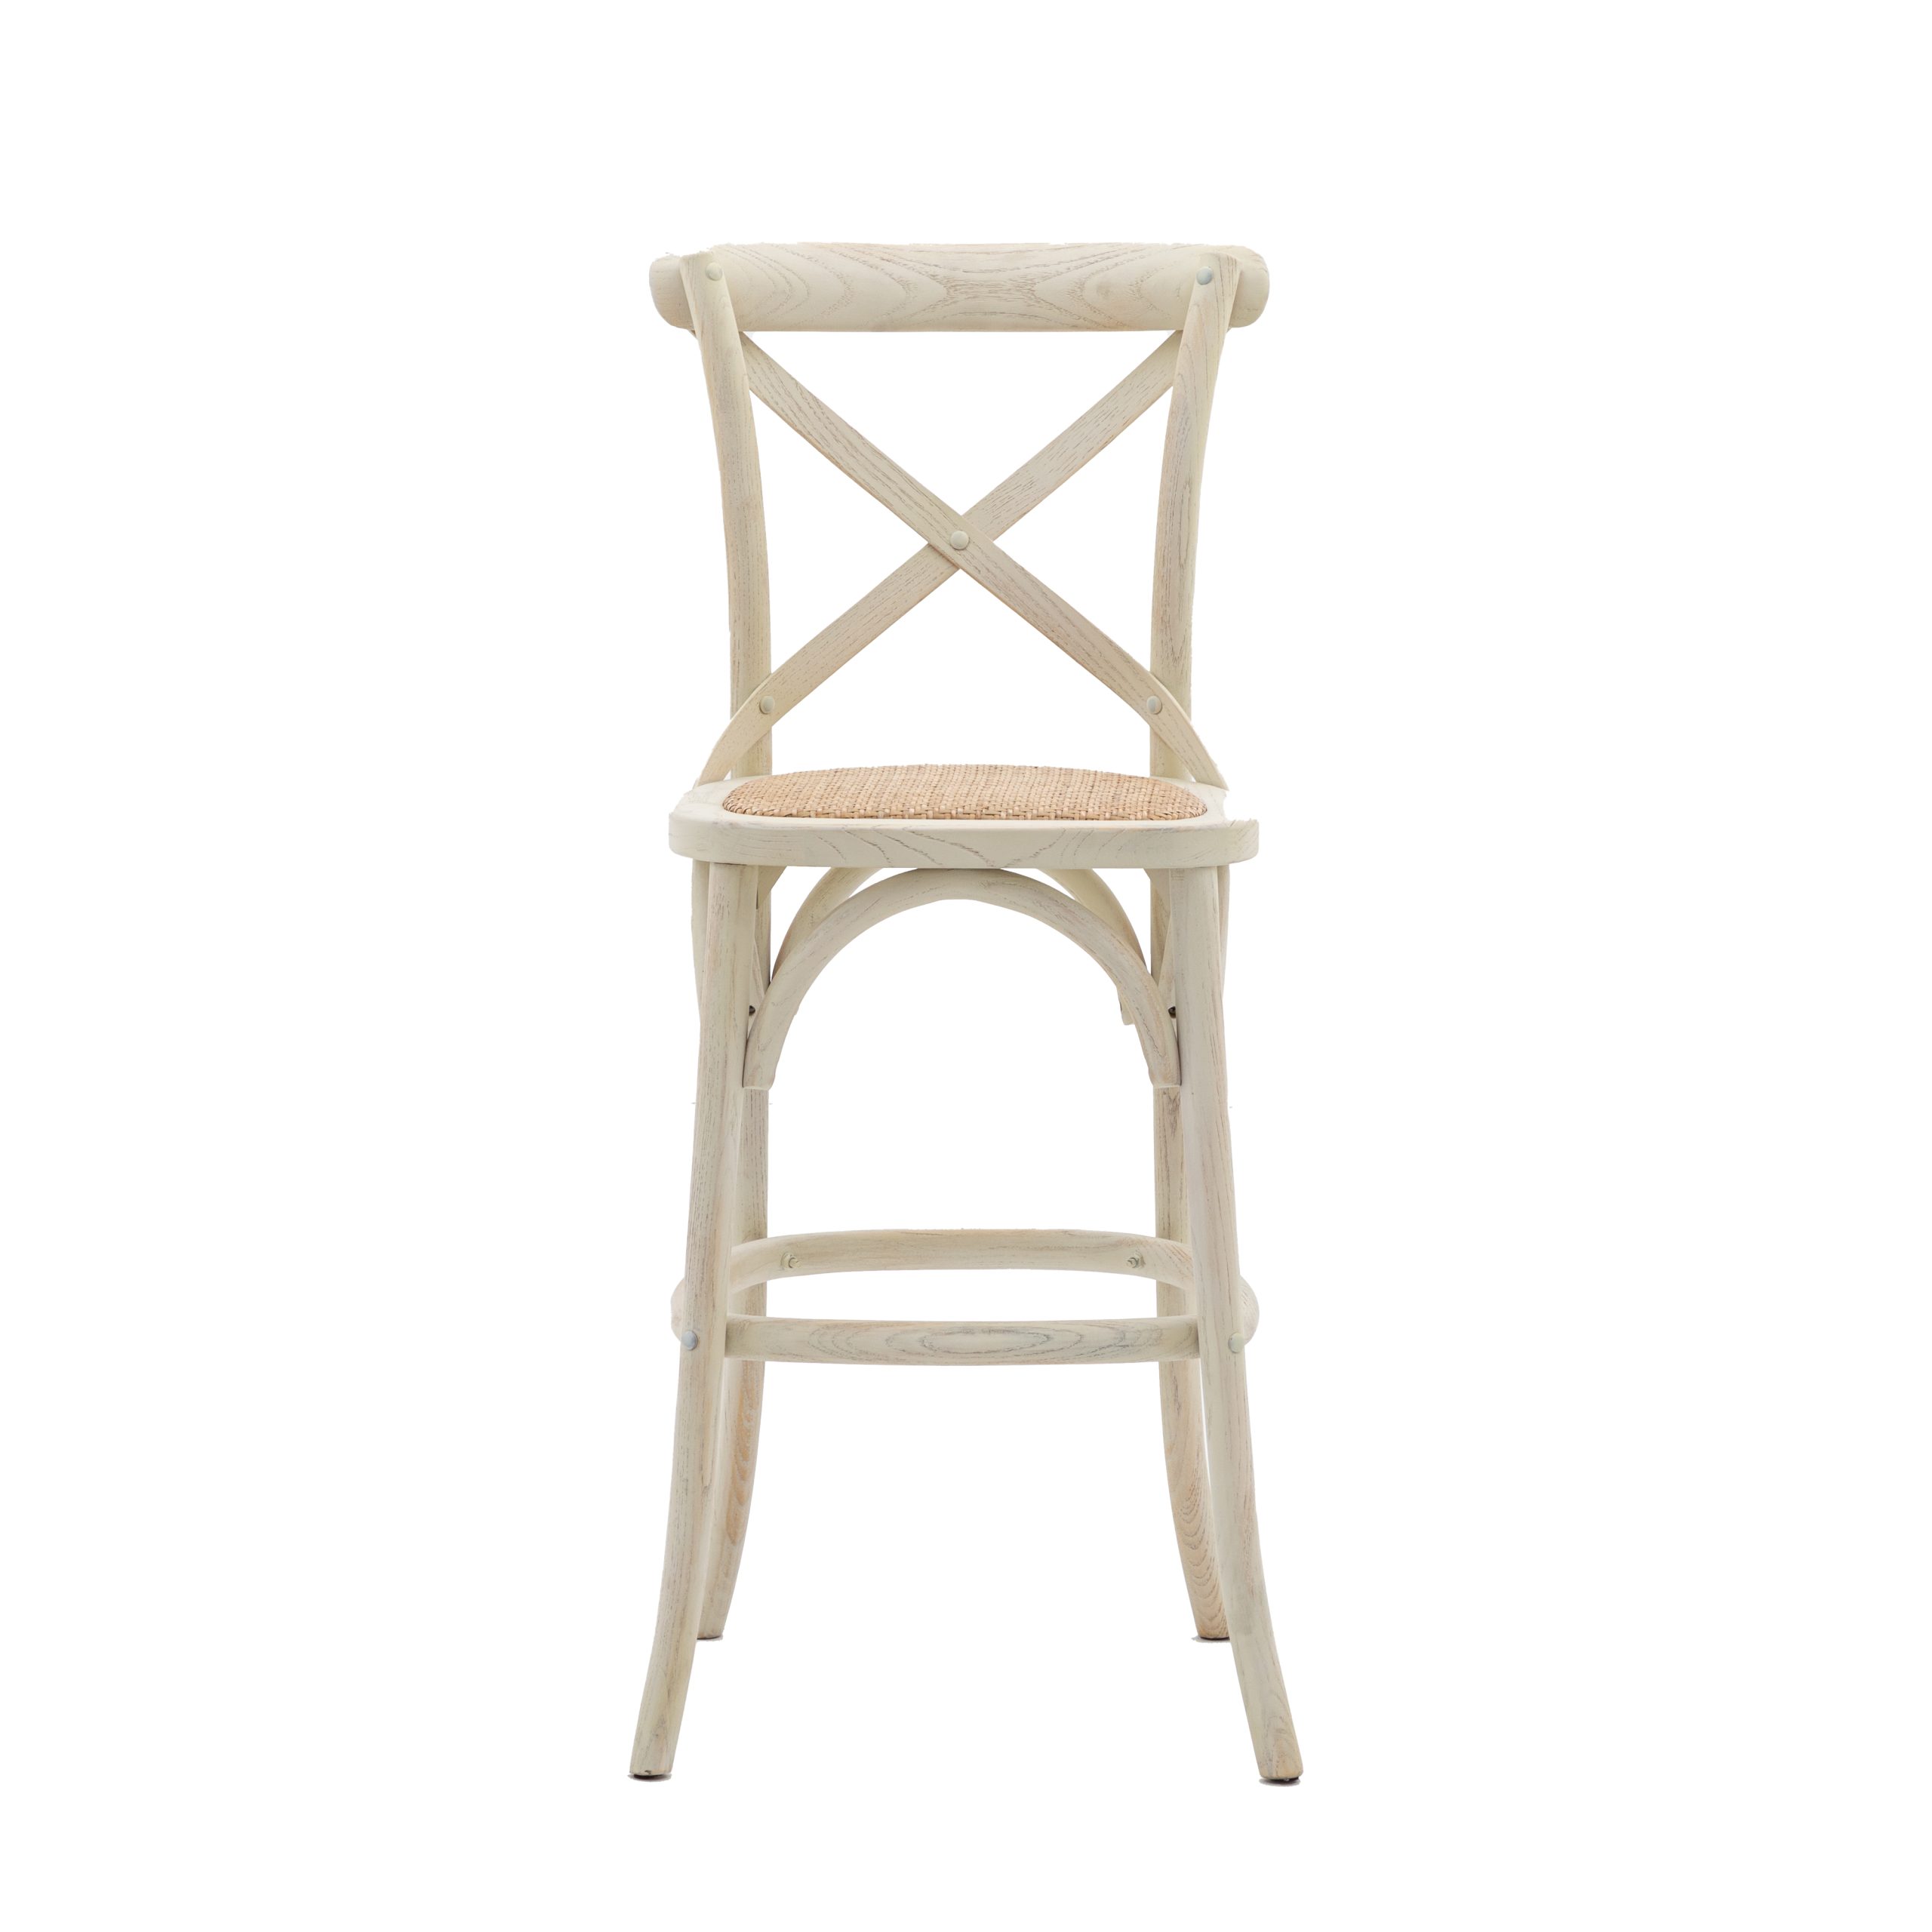 Gallery Direct Cafe Stool White/Rattan (Set of 2)